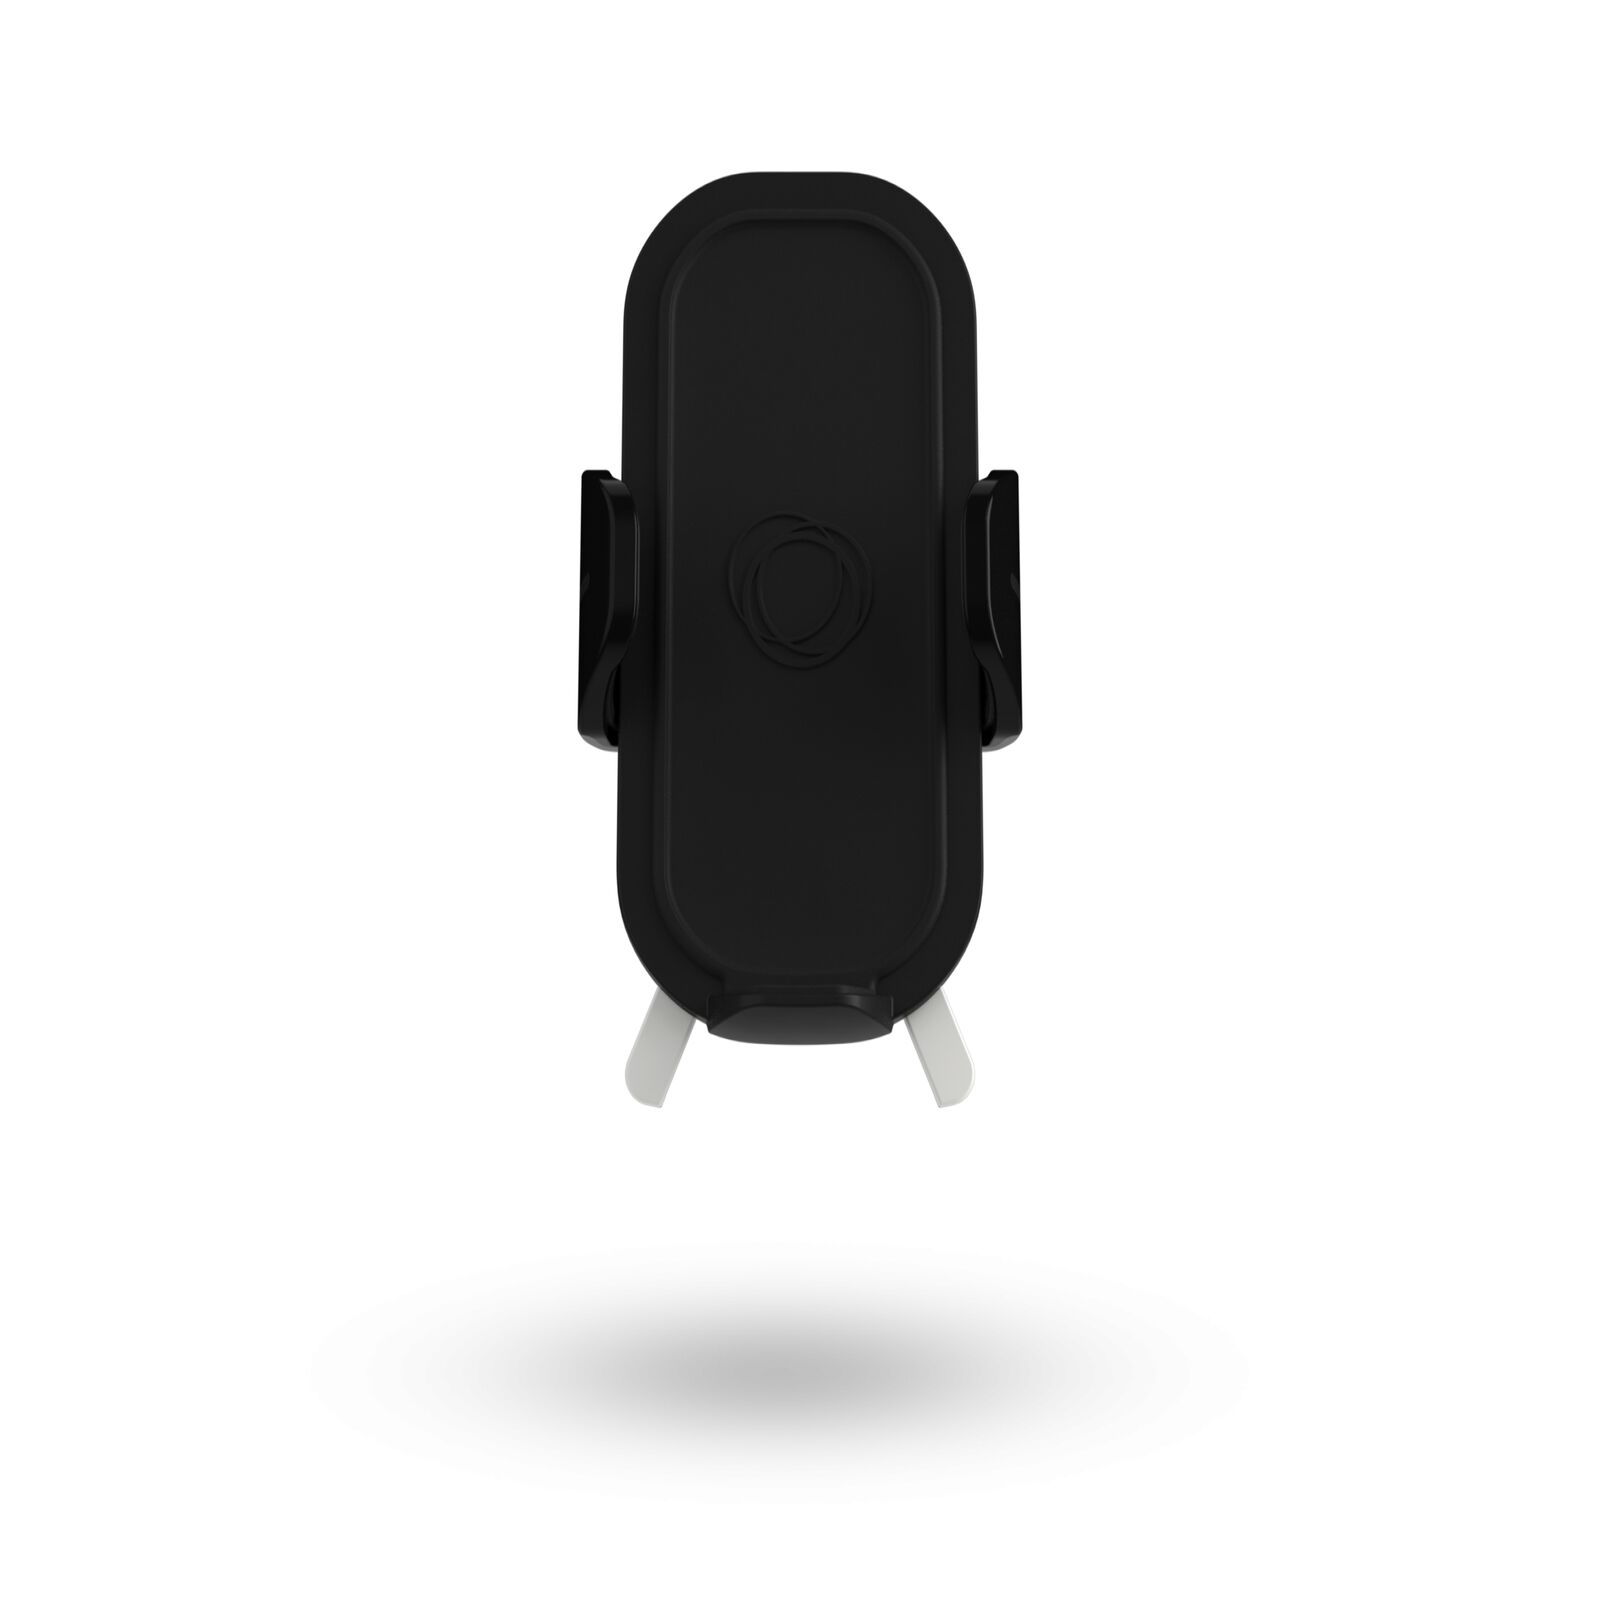 Bugaboo support smartphone - View 1